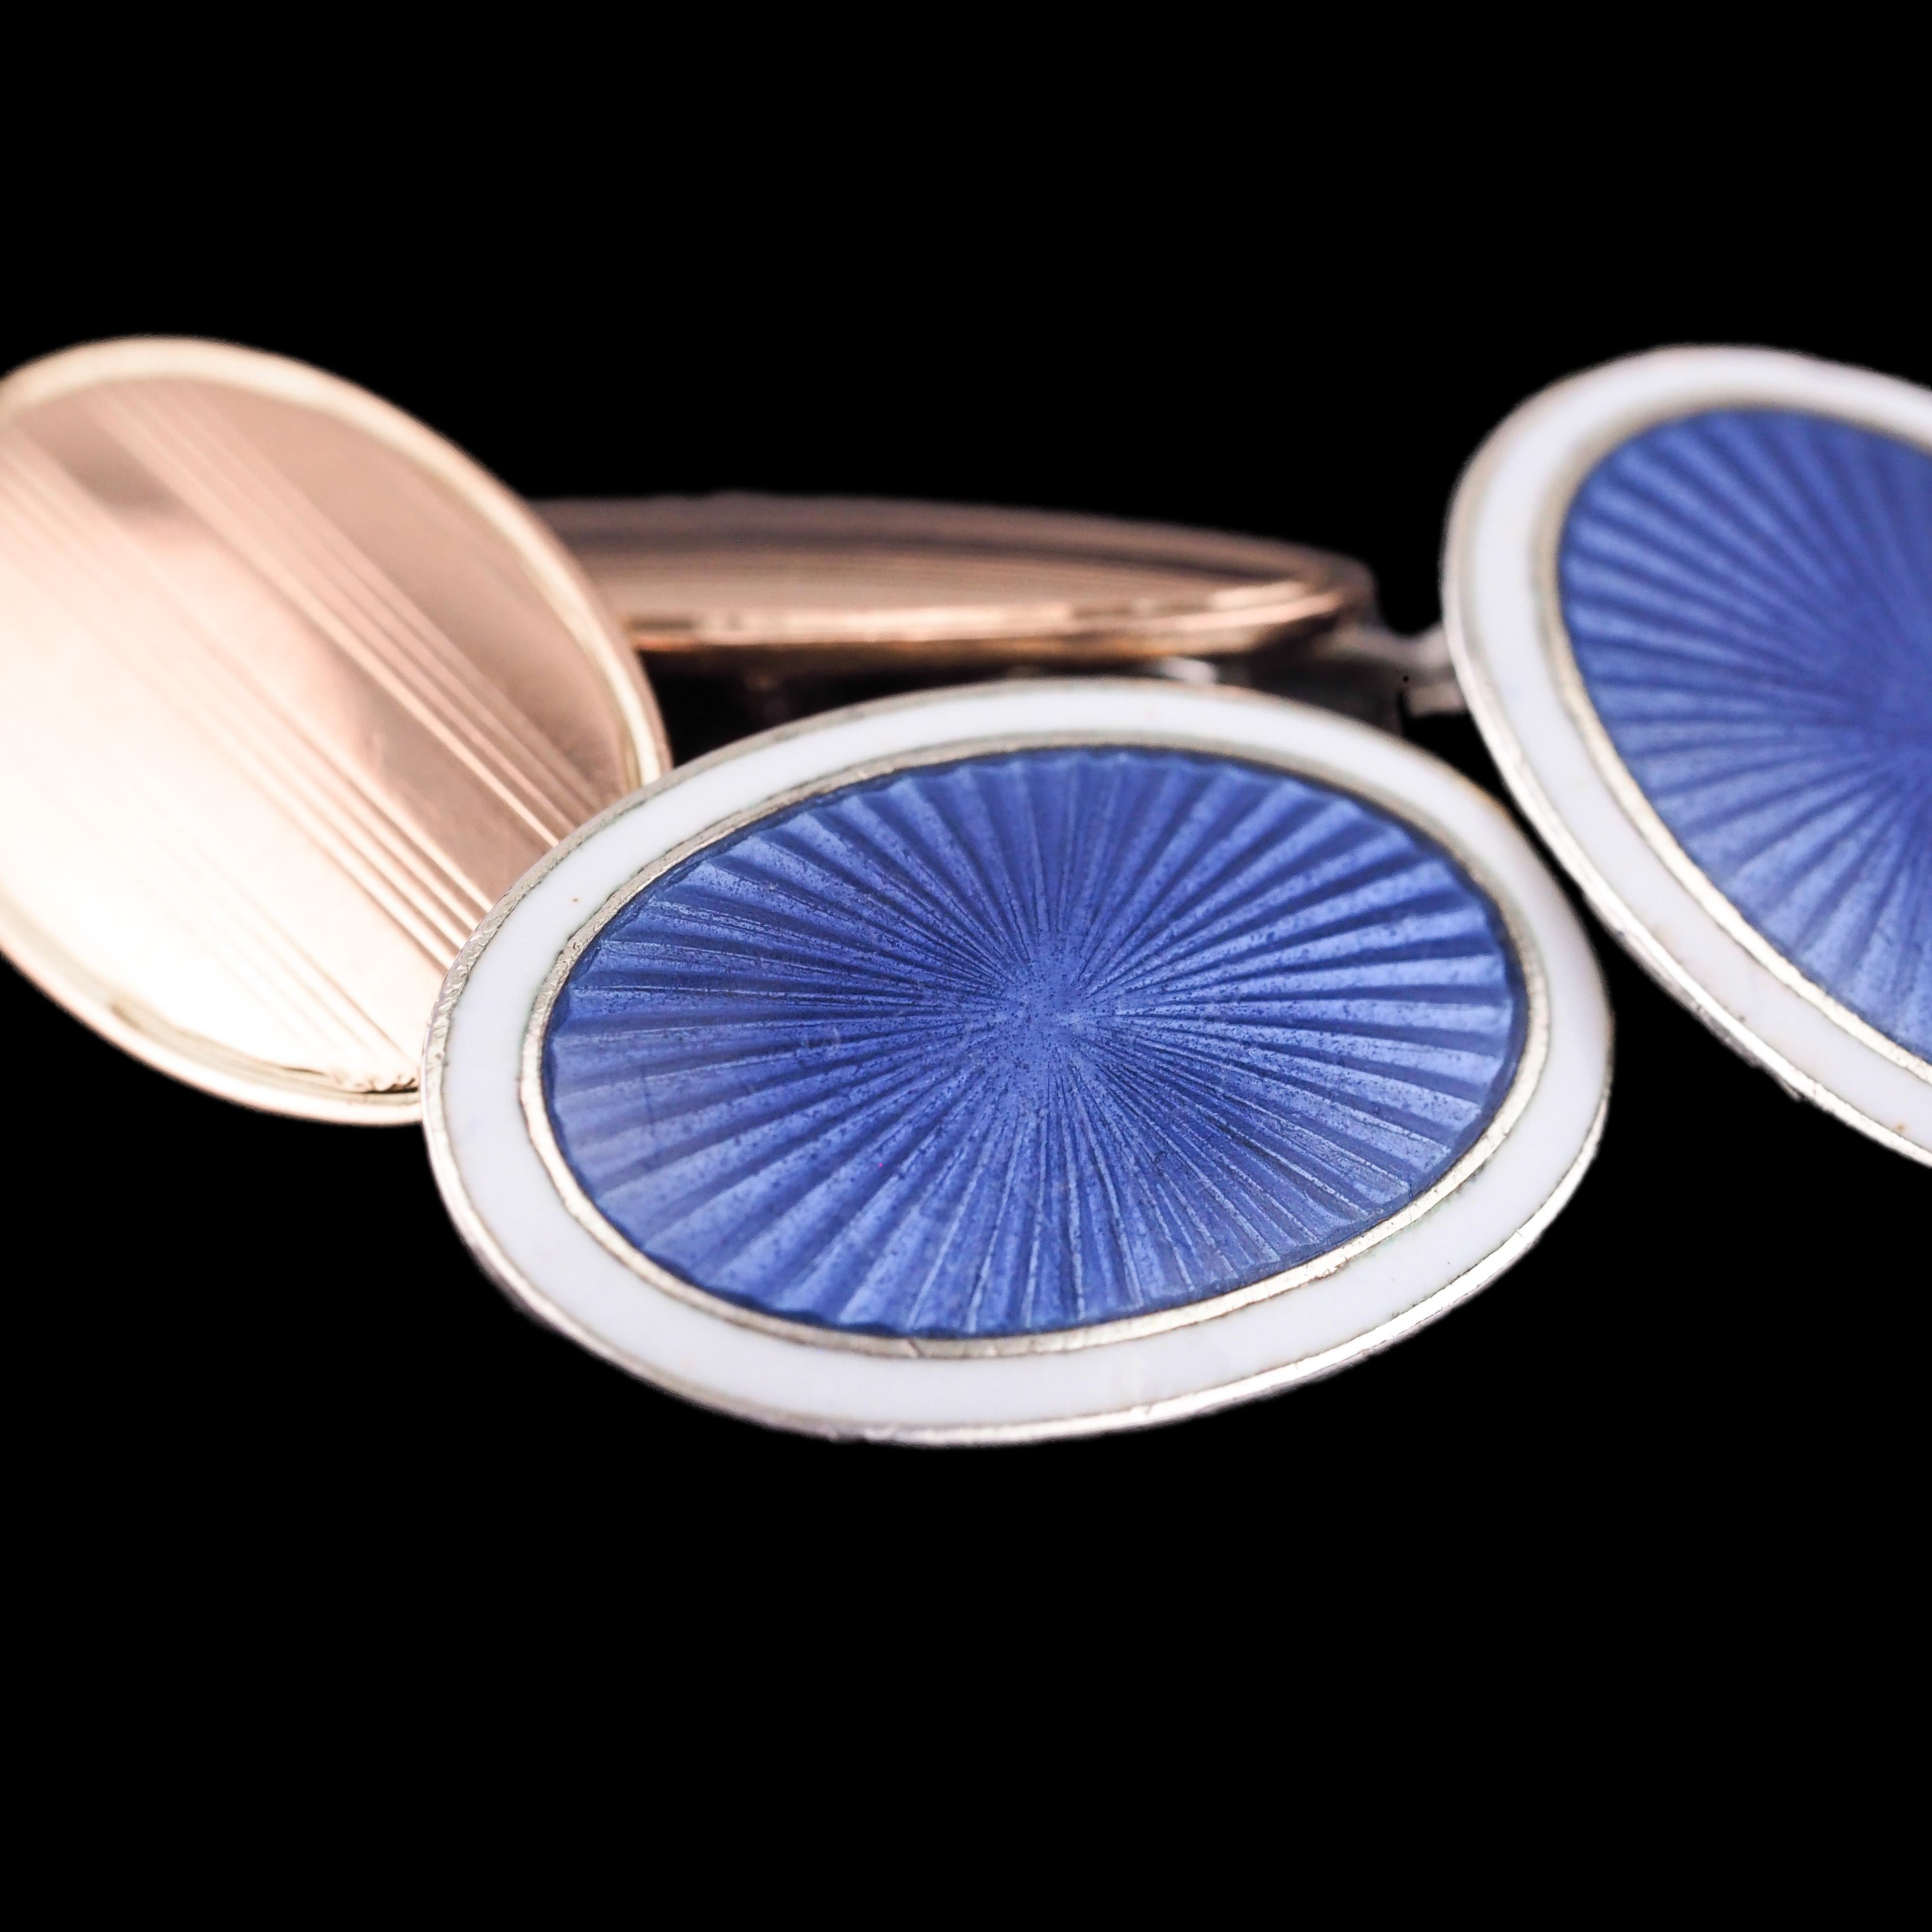 Antique Cufflinks with Blue Guilloche Enamel 9K Gold & Sterling Silver  For Sale 2